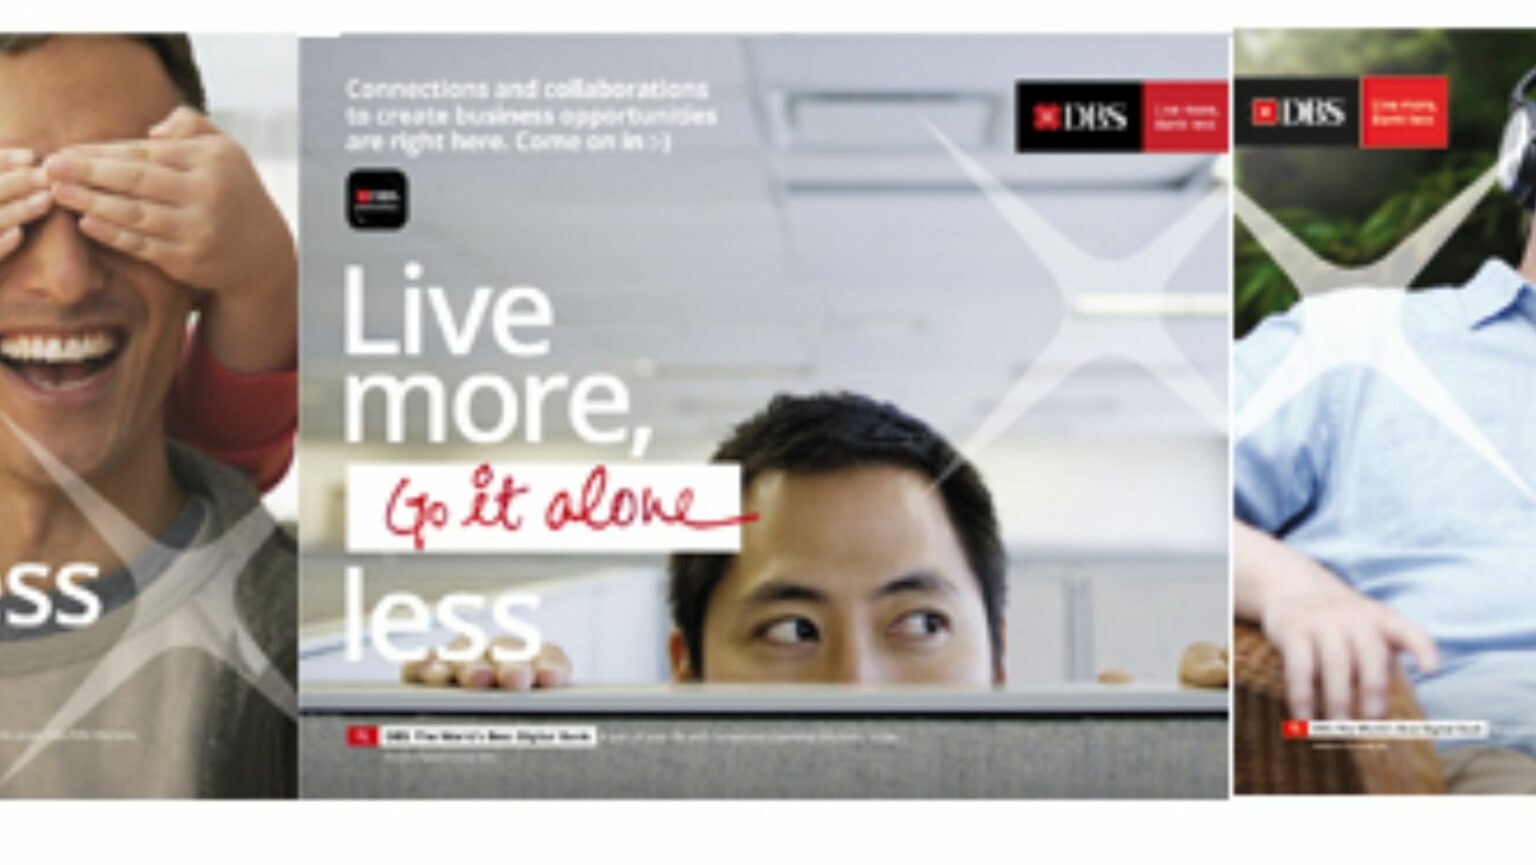 DBS Continues to Inspire with 'Live more, Bank less'